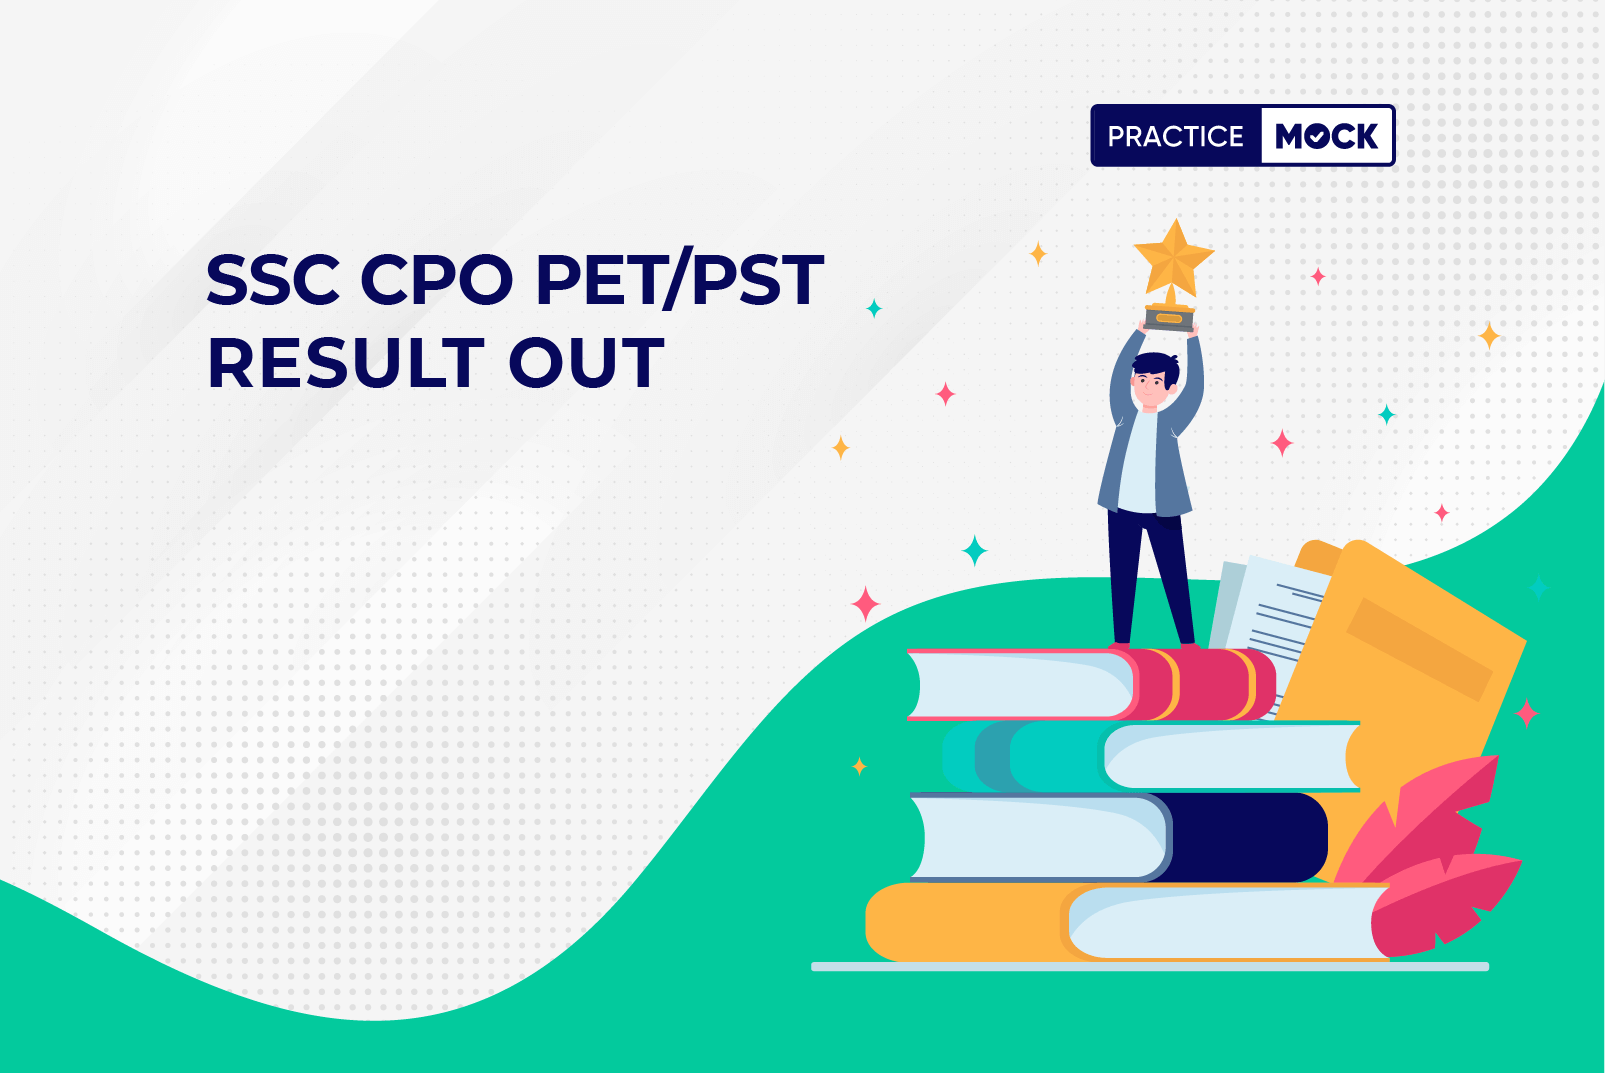 SSC CPO PETPST Result Out